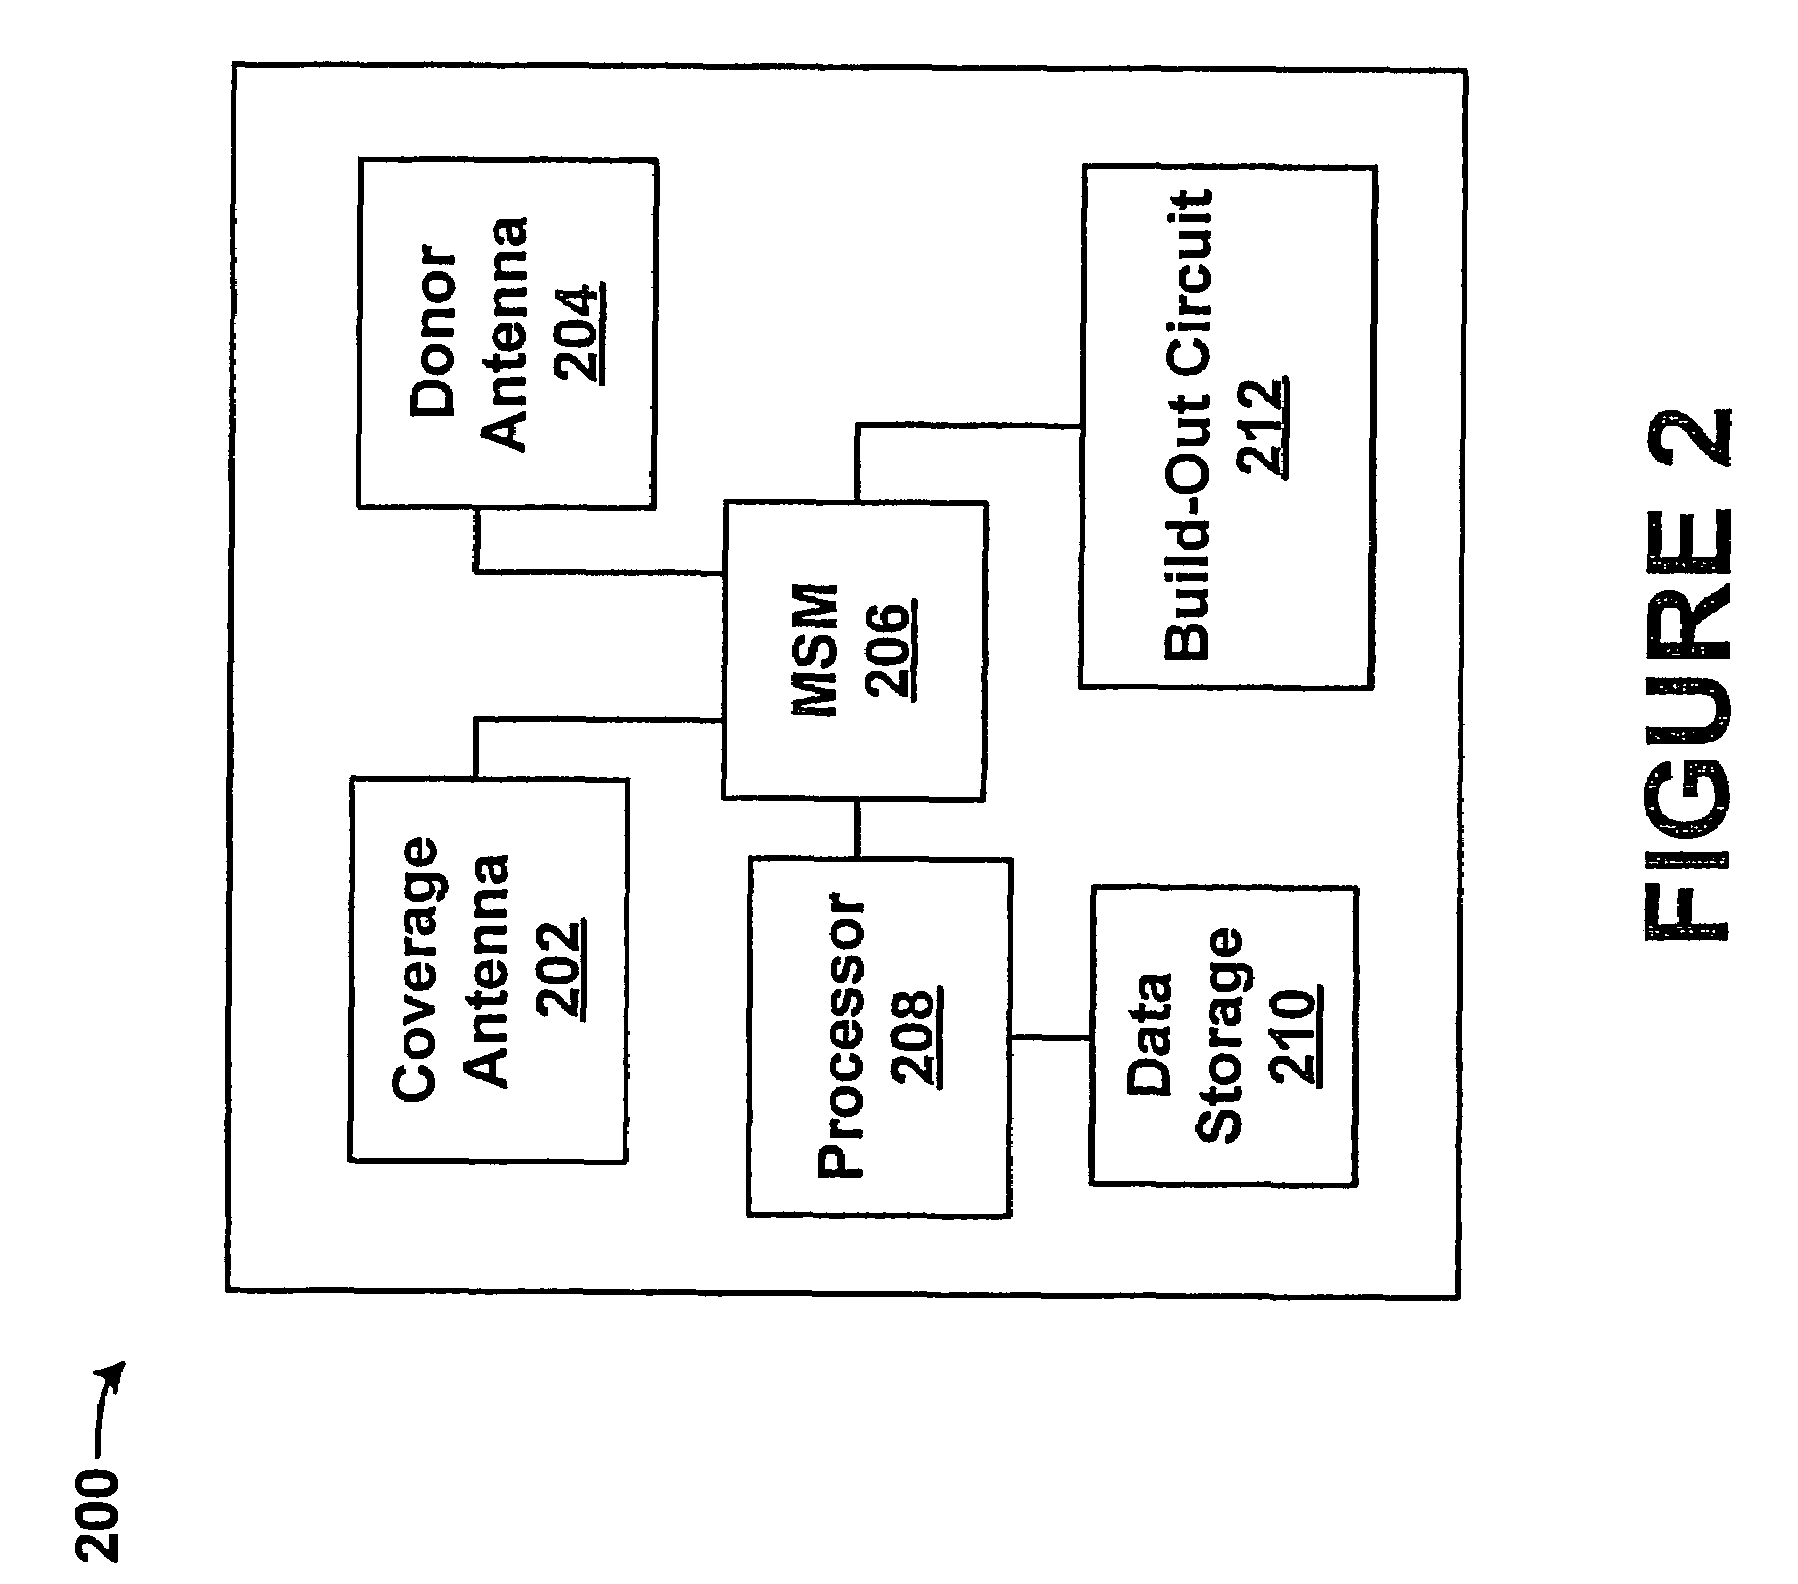 Wireless repeater and method for managing air interface communications